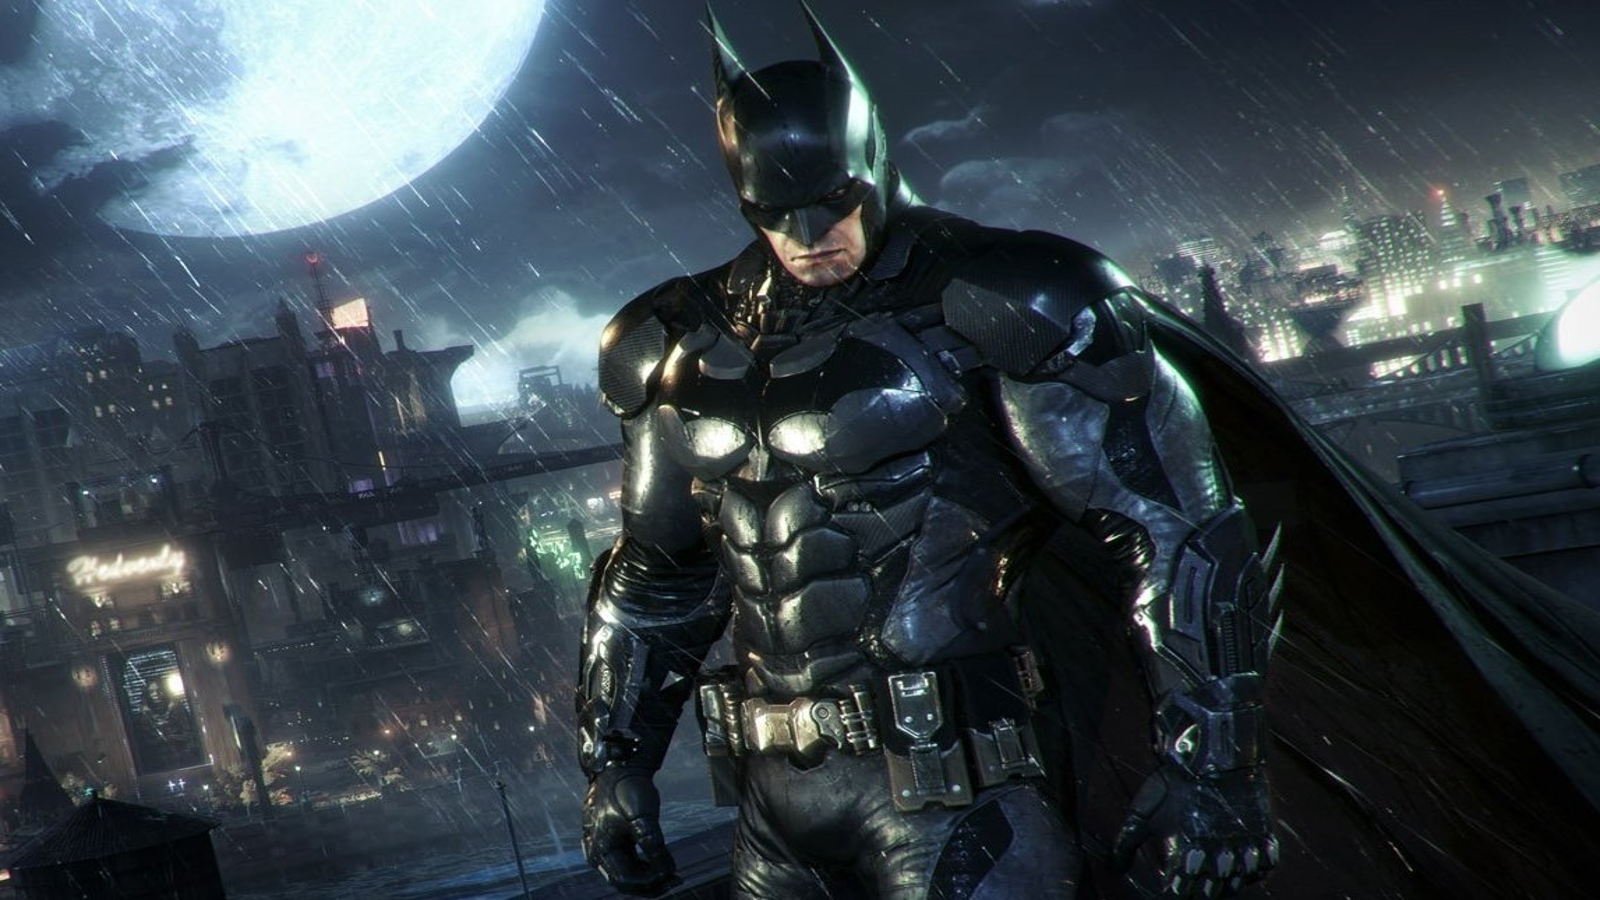 What does it take to run Arkham Knight smoothly on PC? 